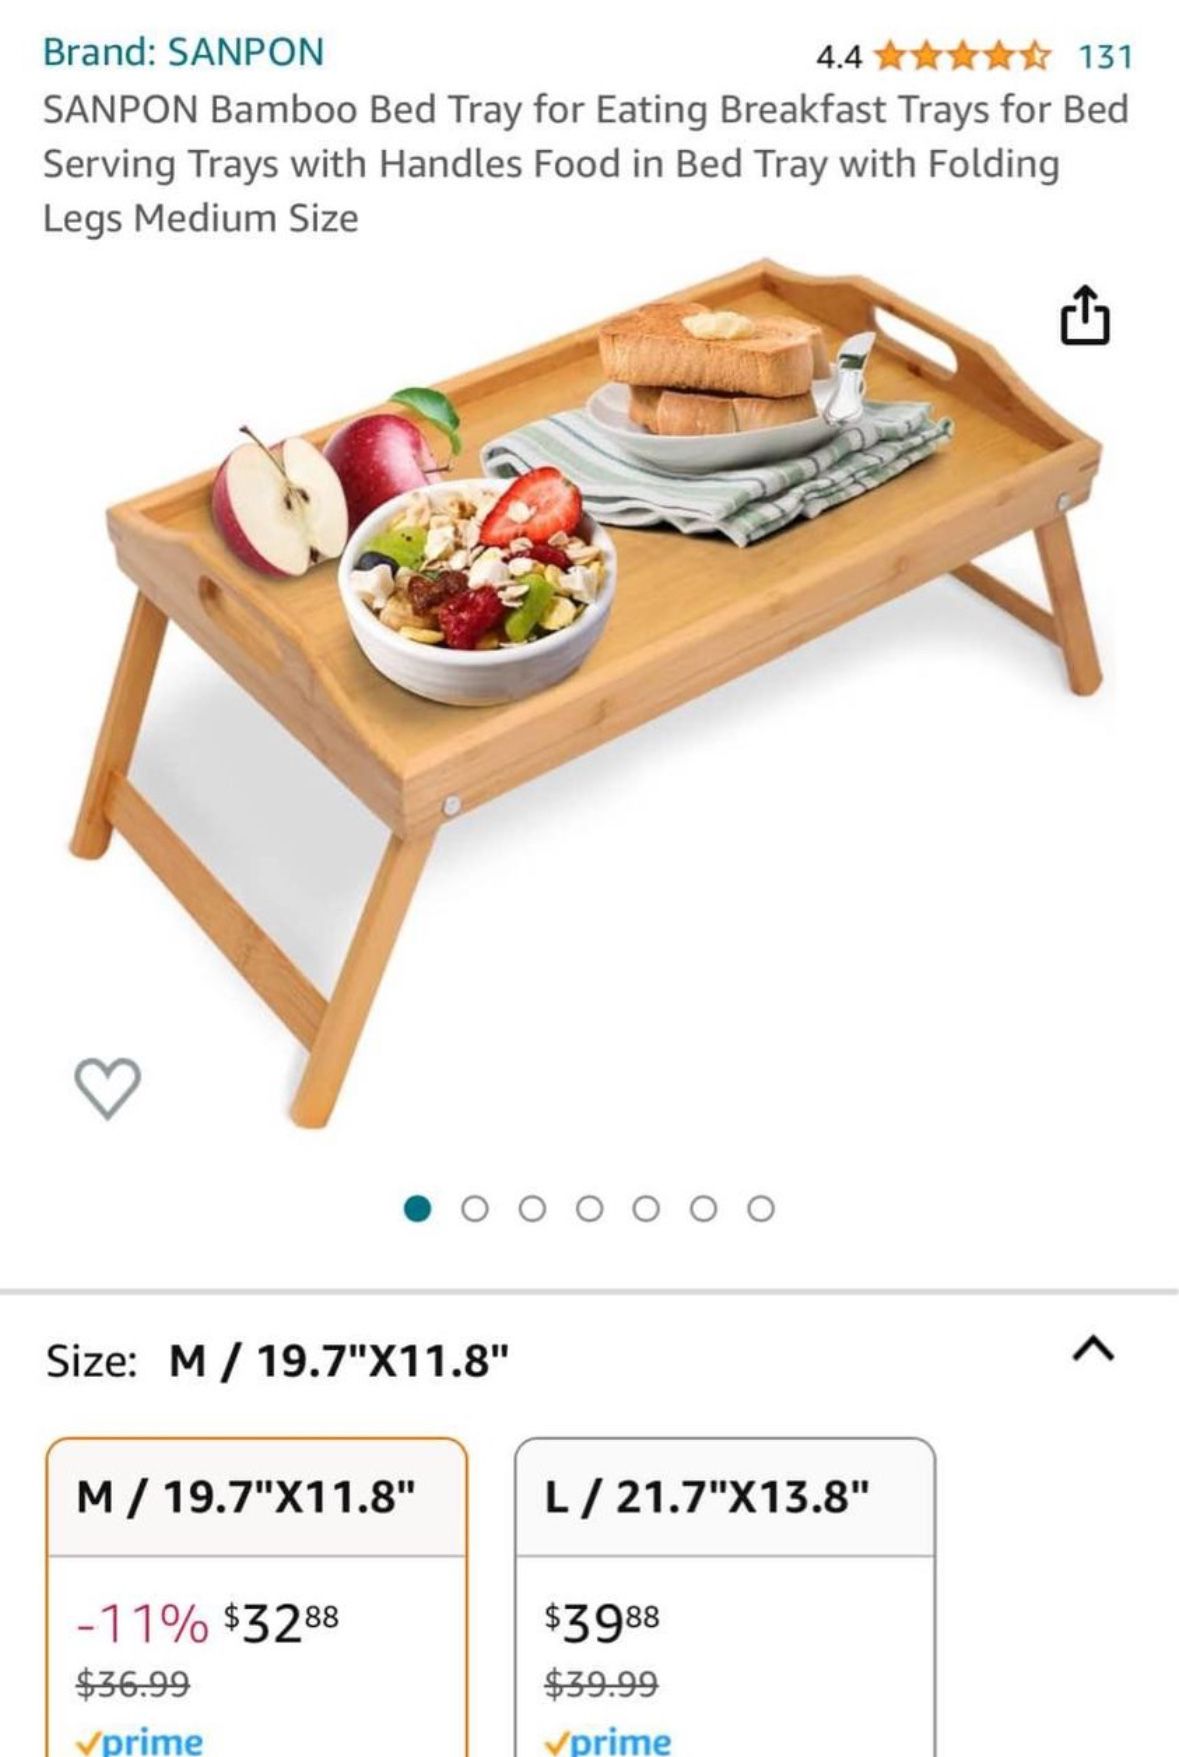 SANPON Bamboo Bed Tray for Eating Breakfast Trays for Bed,Serving Trays  with Handles Food in Bed Tray with Folding Legs Medium Size